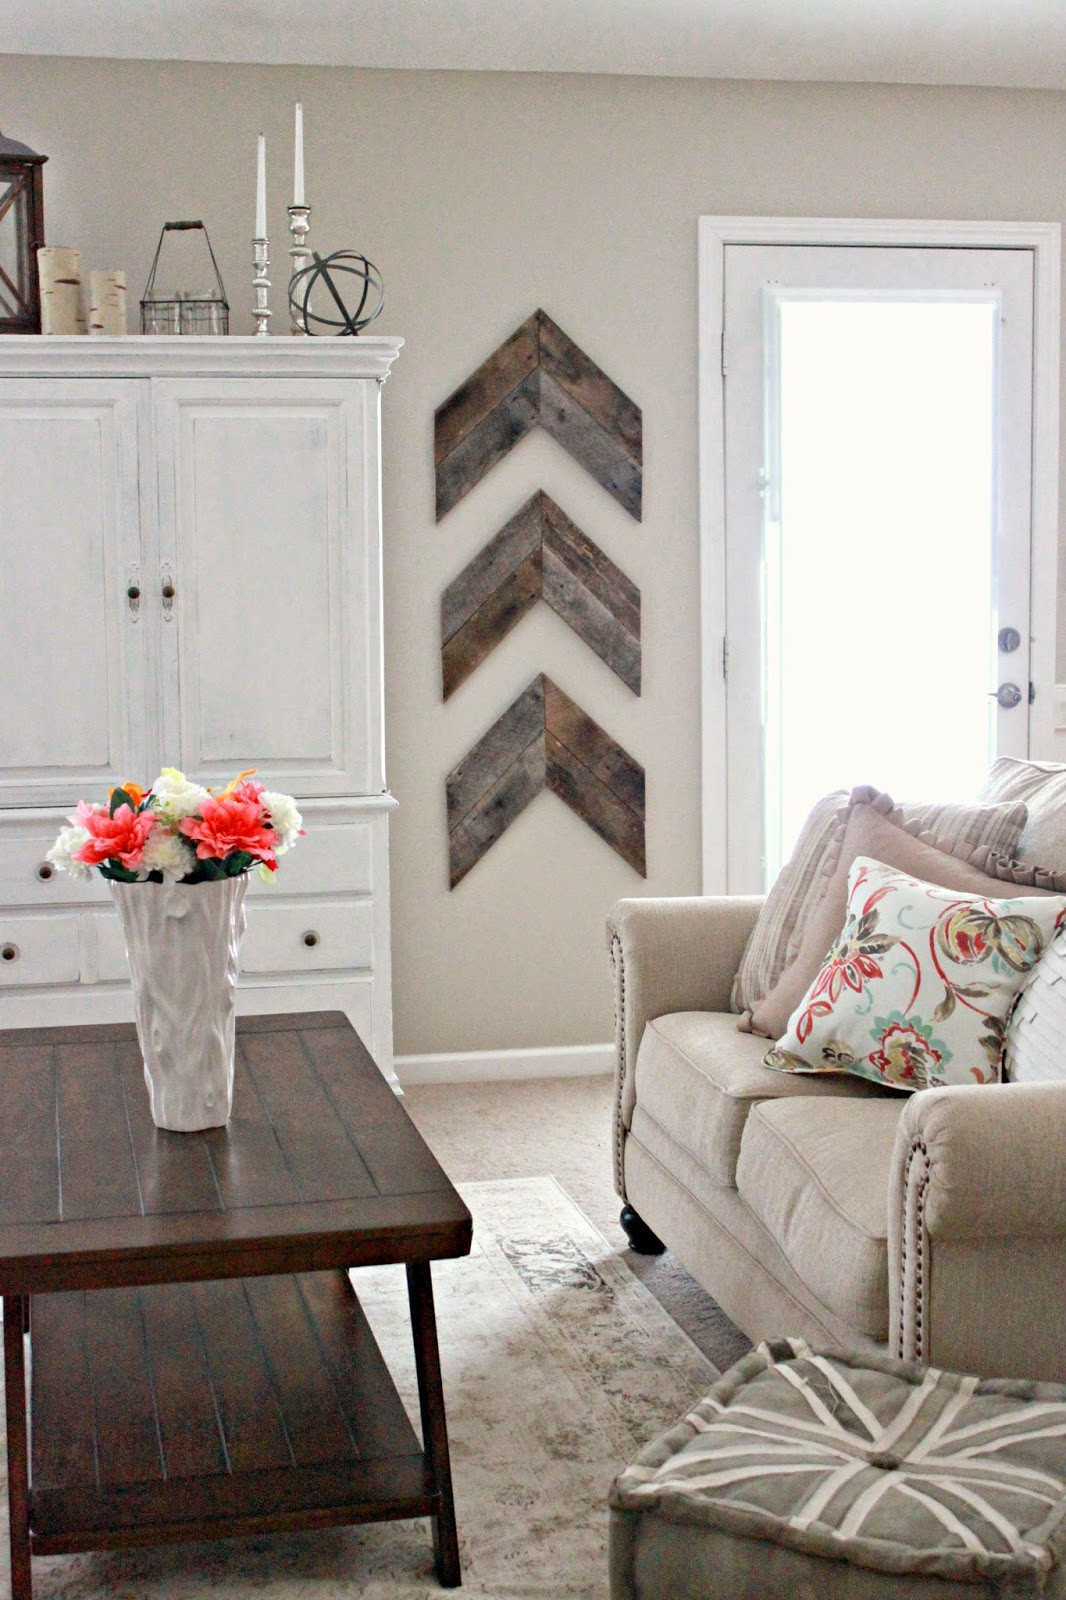 DIY Decor Living Room
 15 Striking Ways to Decorate with Arrows